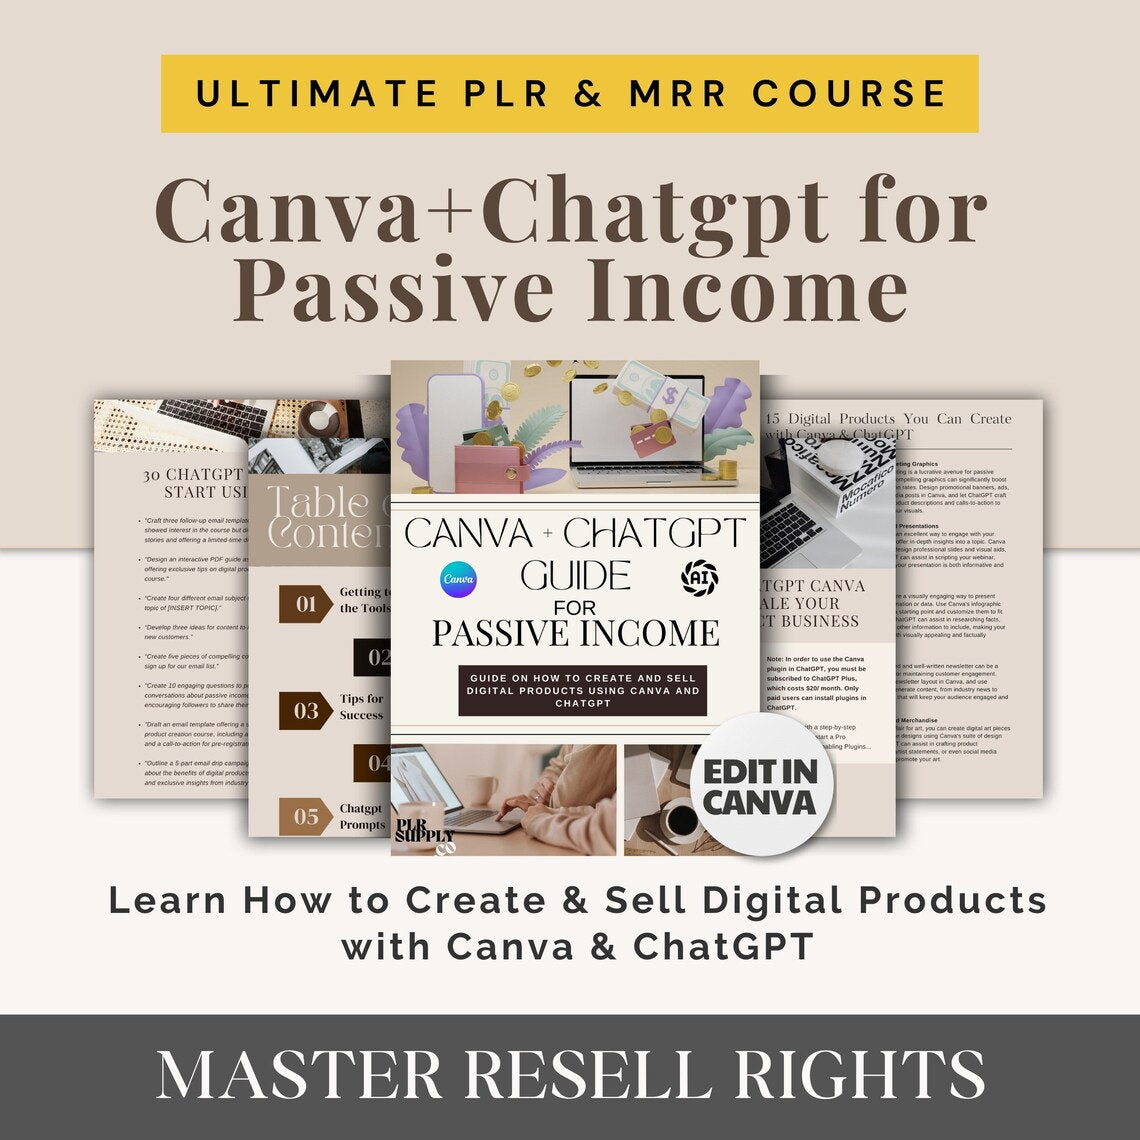 Ultimate Faceless Marketing Course + Reels + Videos Bundle with Resell Rights- DFY Digital Product